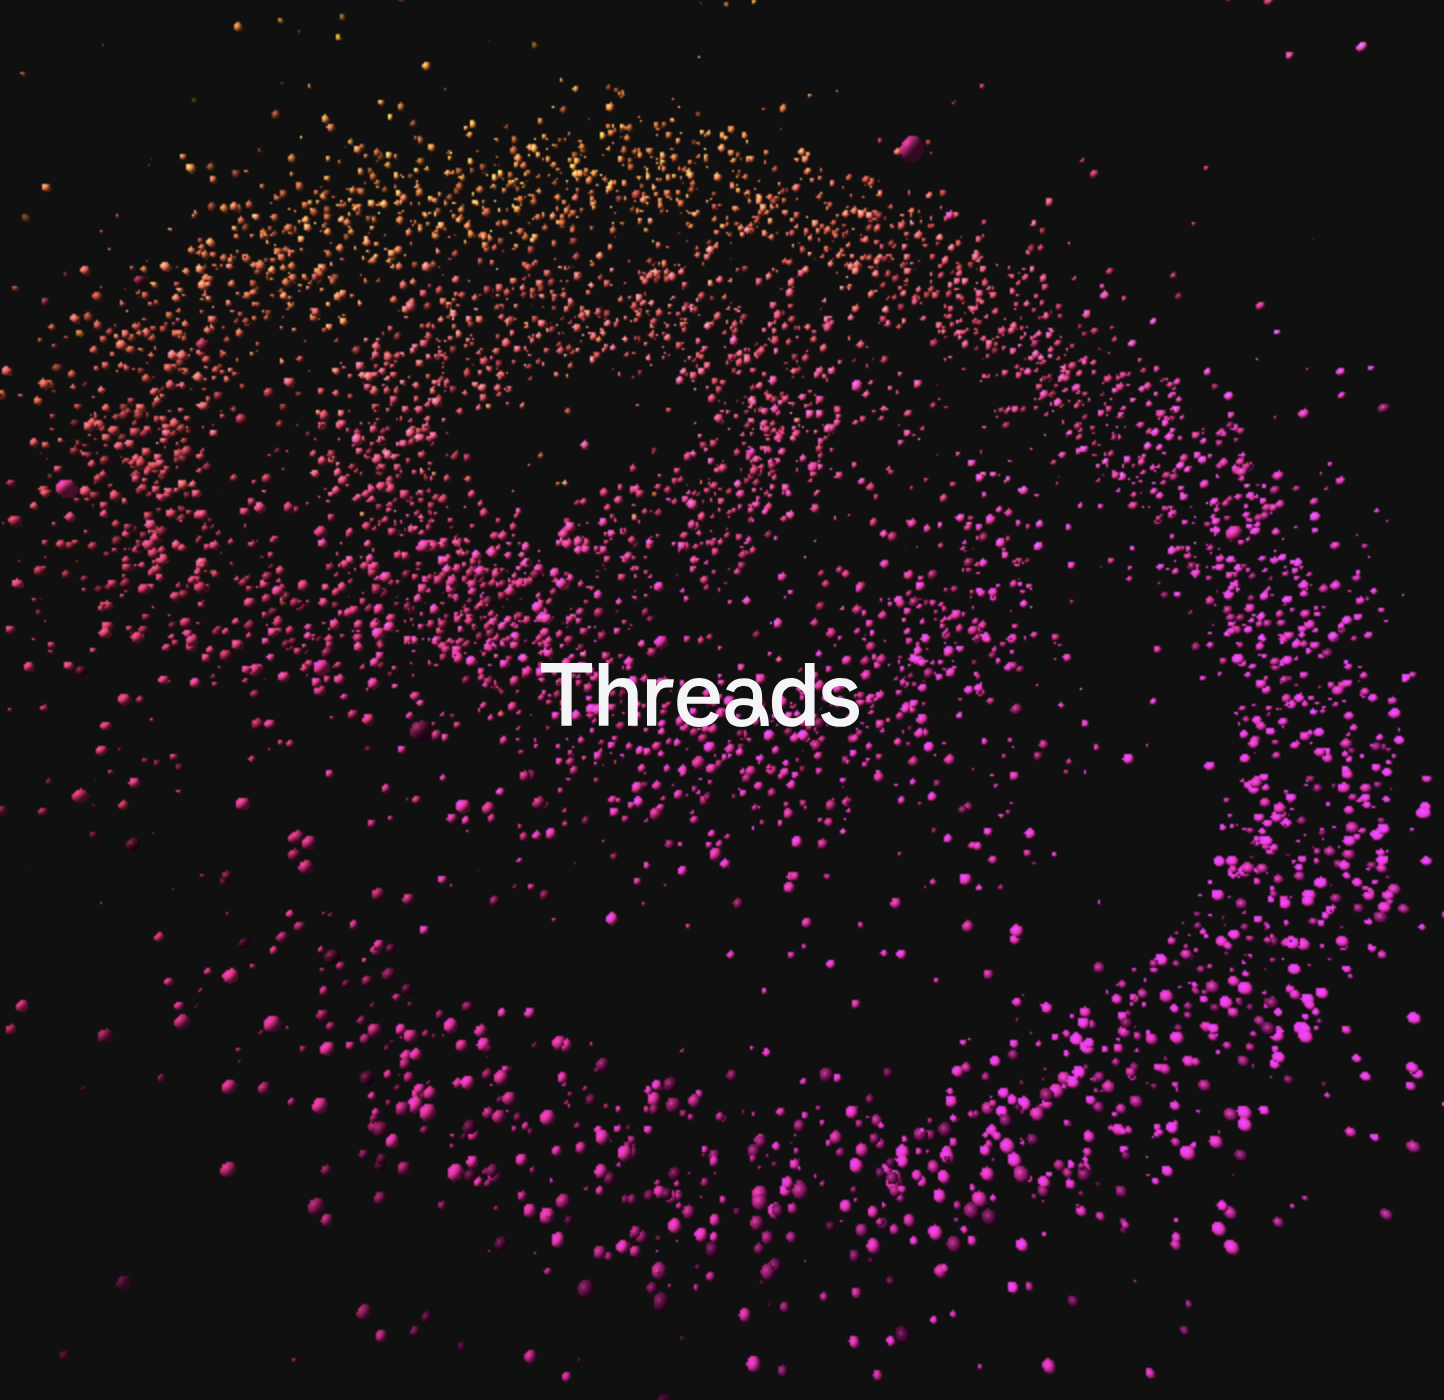 Meta Unveils 'Threads', an Instagram-Powered, Text-Based Social App Set to Rival Twitter